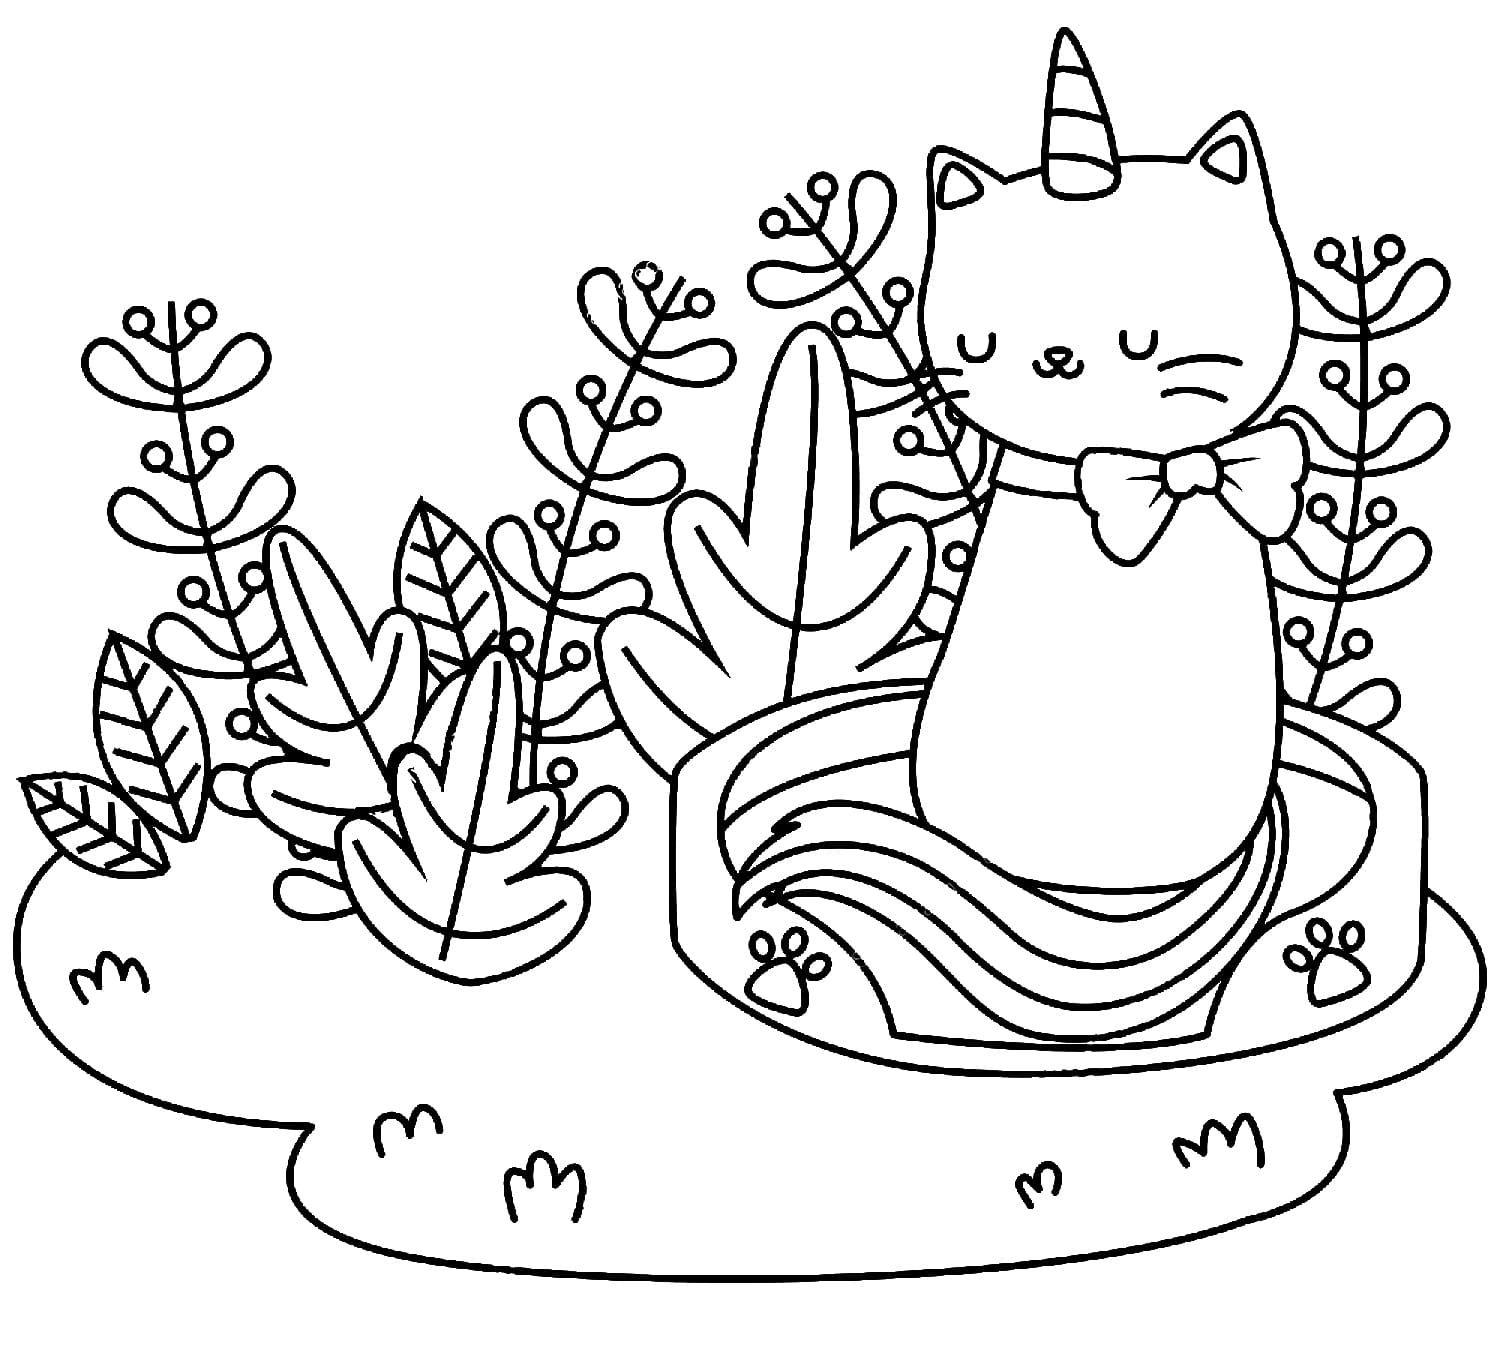 Coloring page Unicorn Cat in nature